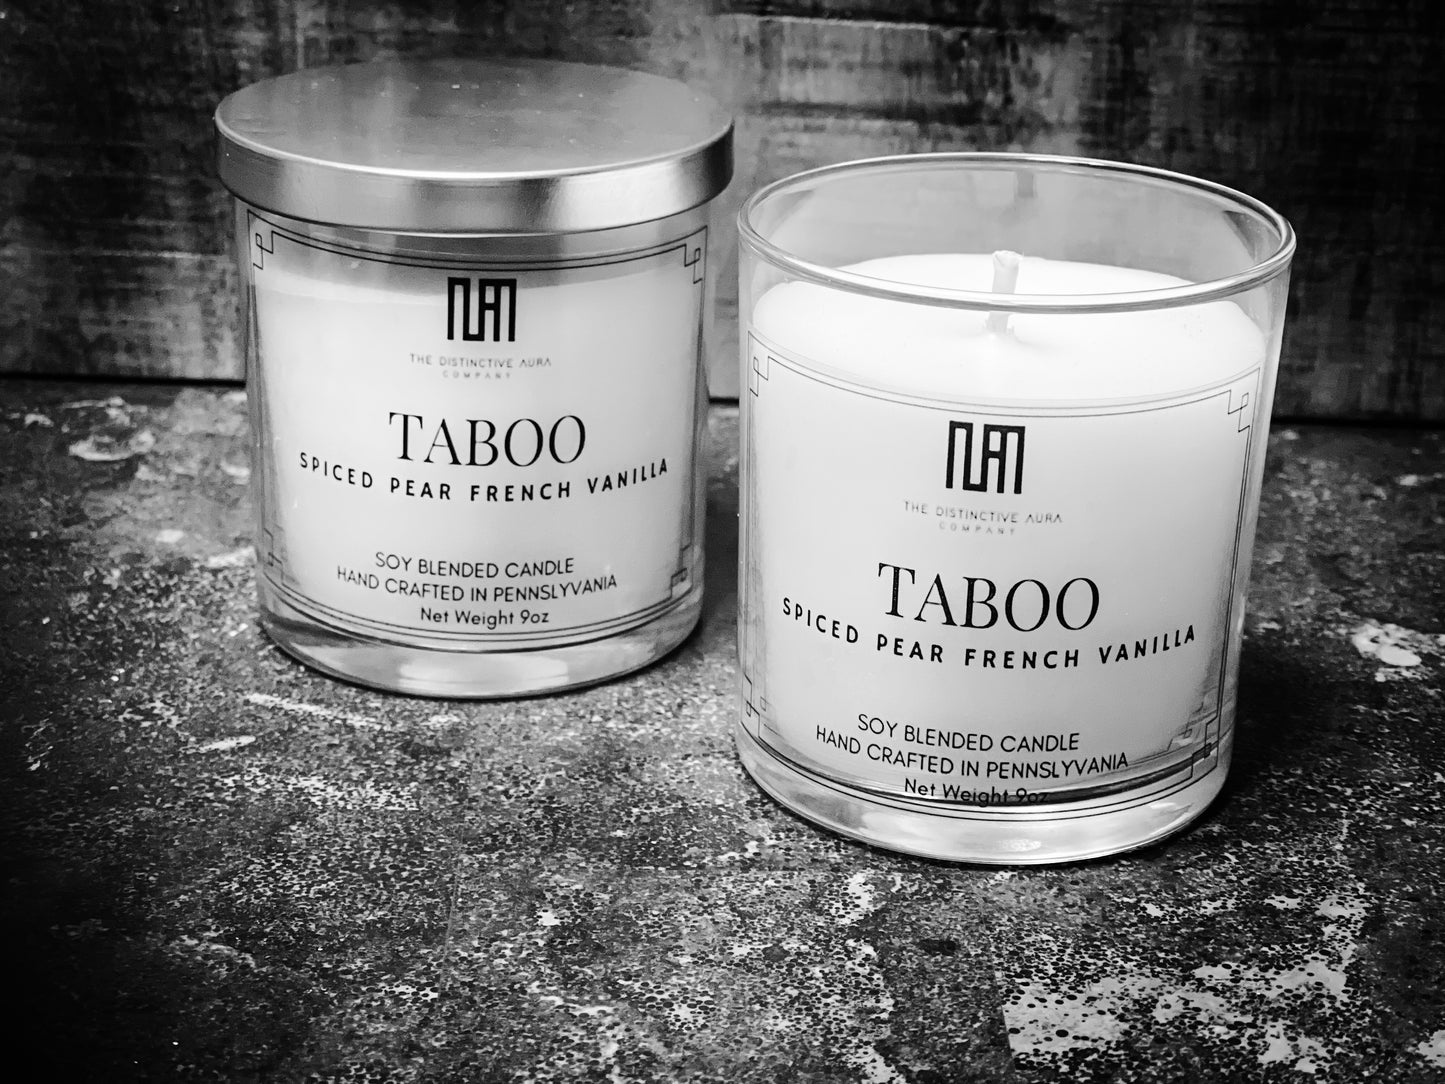 Taboo premium candle from The Distinctive Aura Company